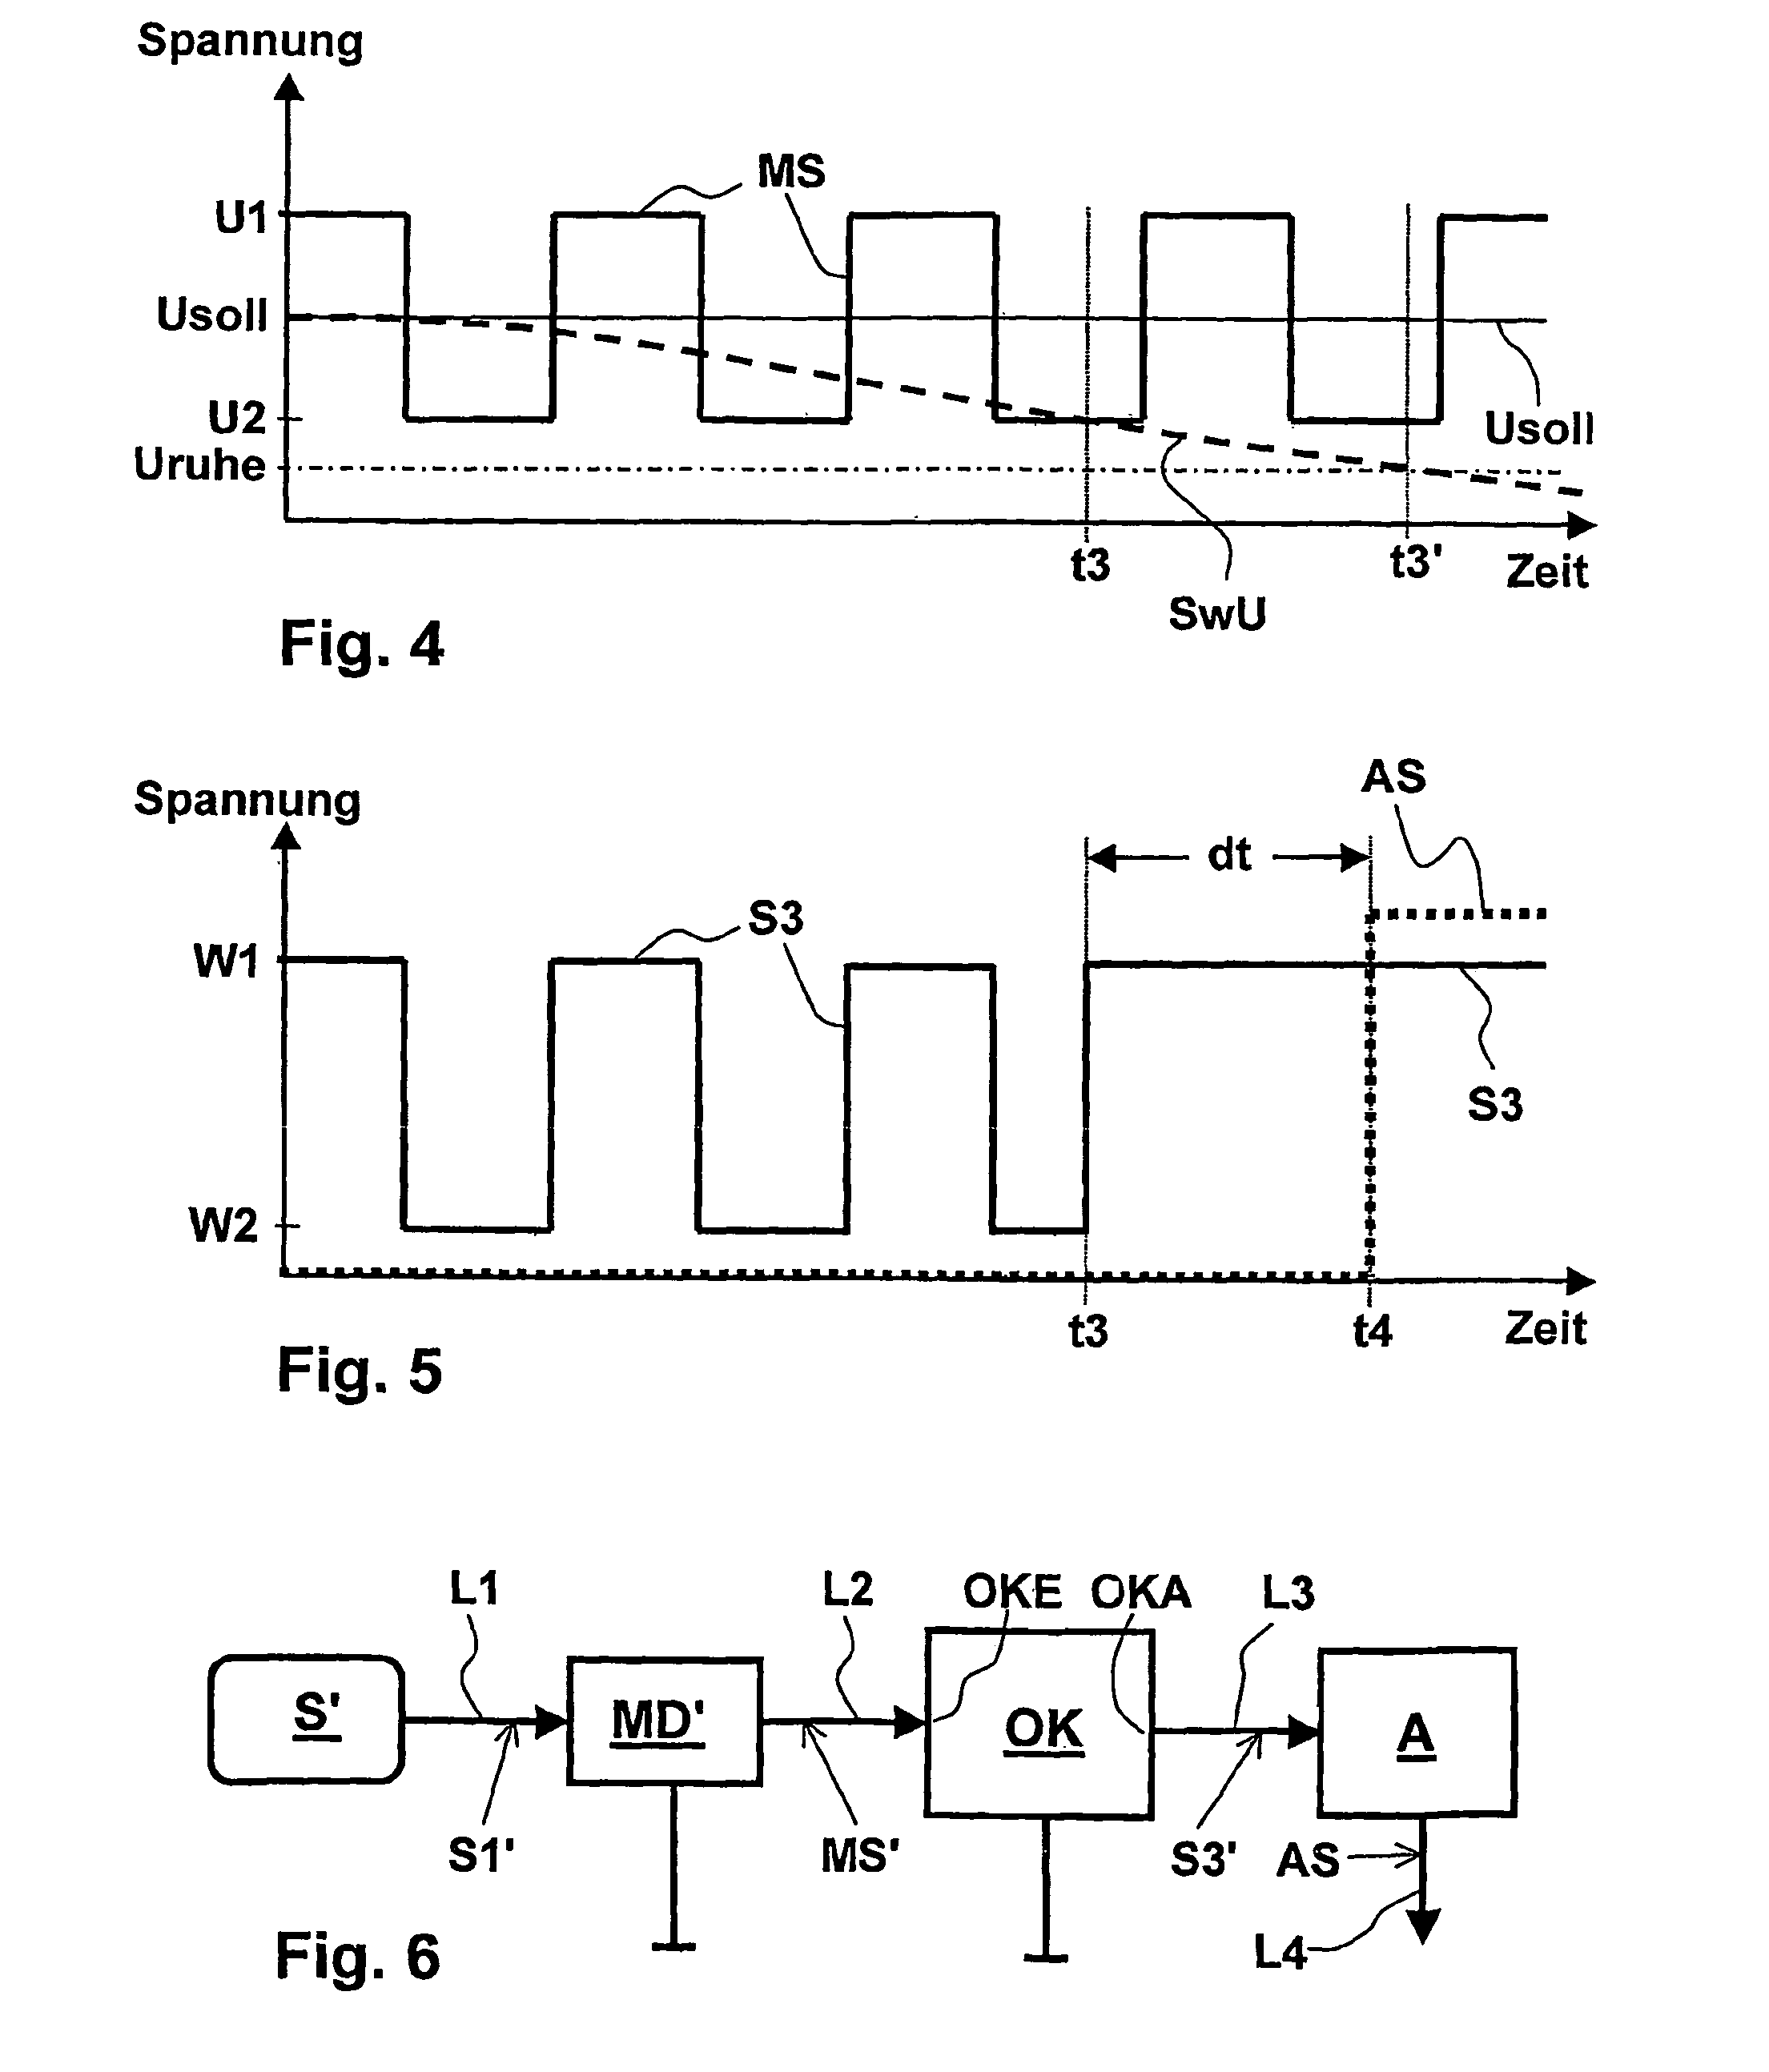 Method for monitoring whether the switching threshold of a switching transducer lies within a predefined tolerance range